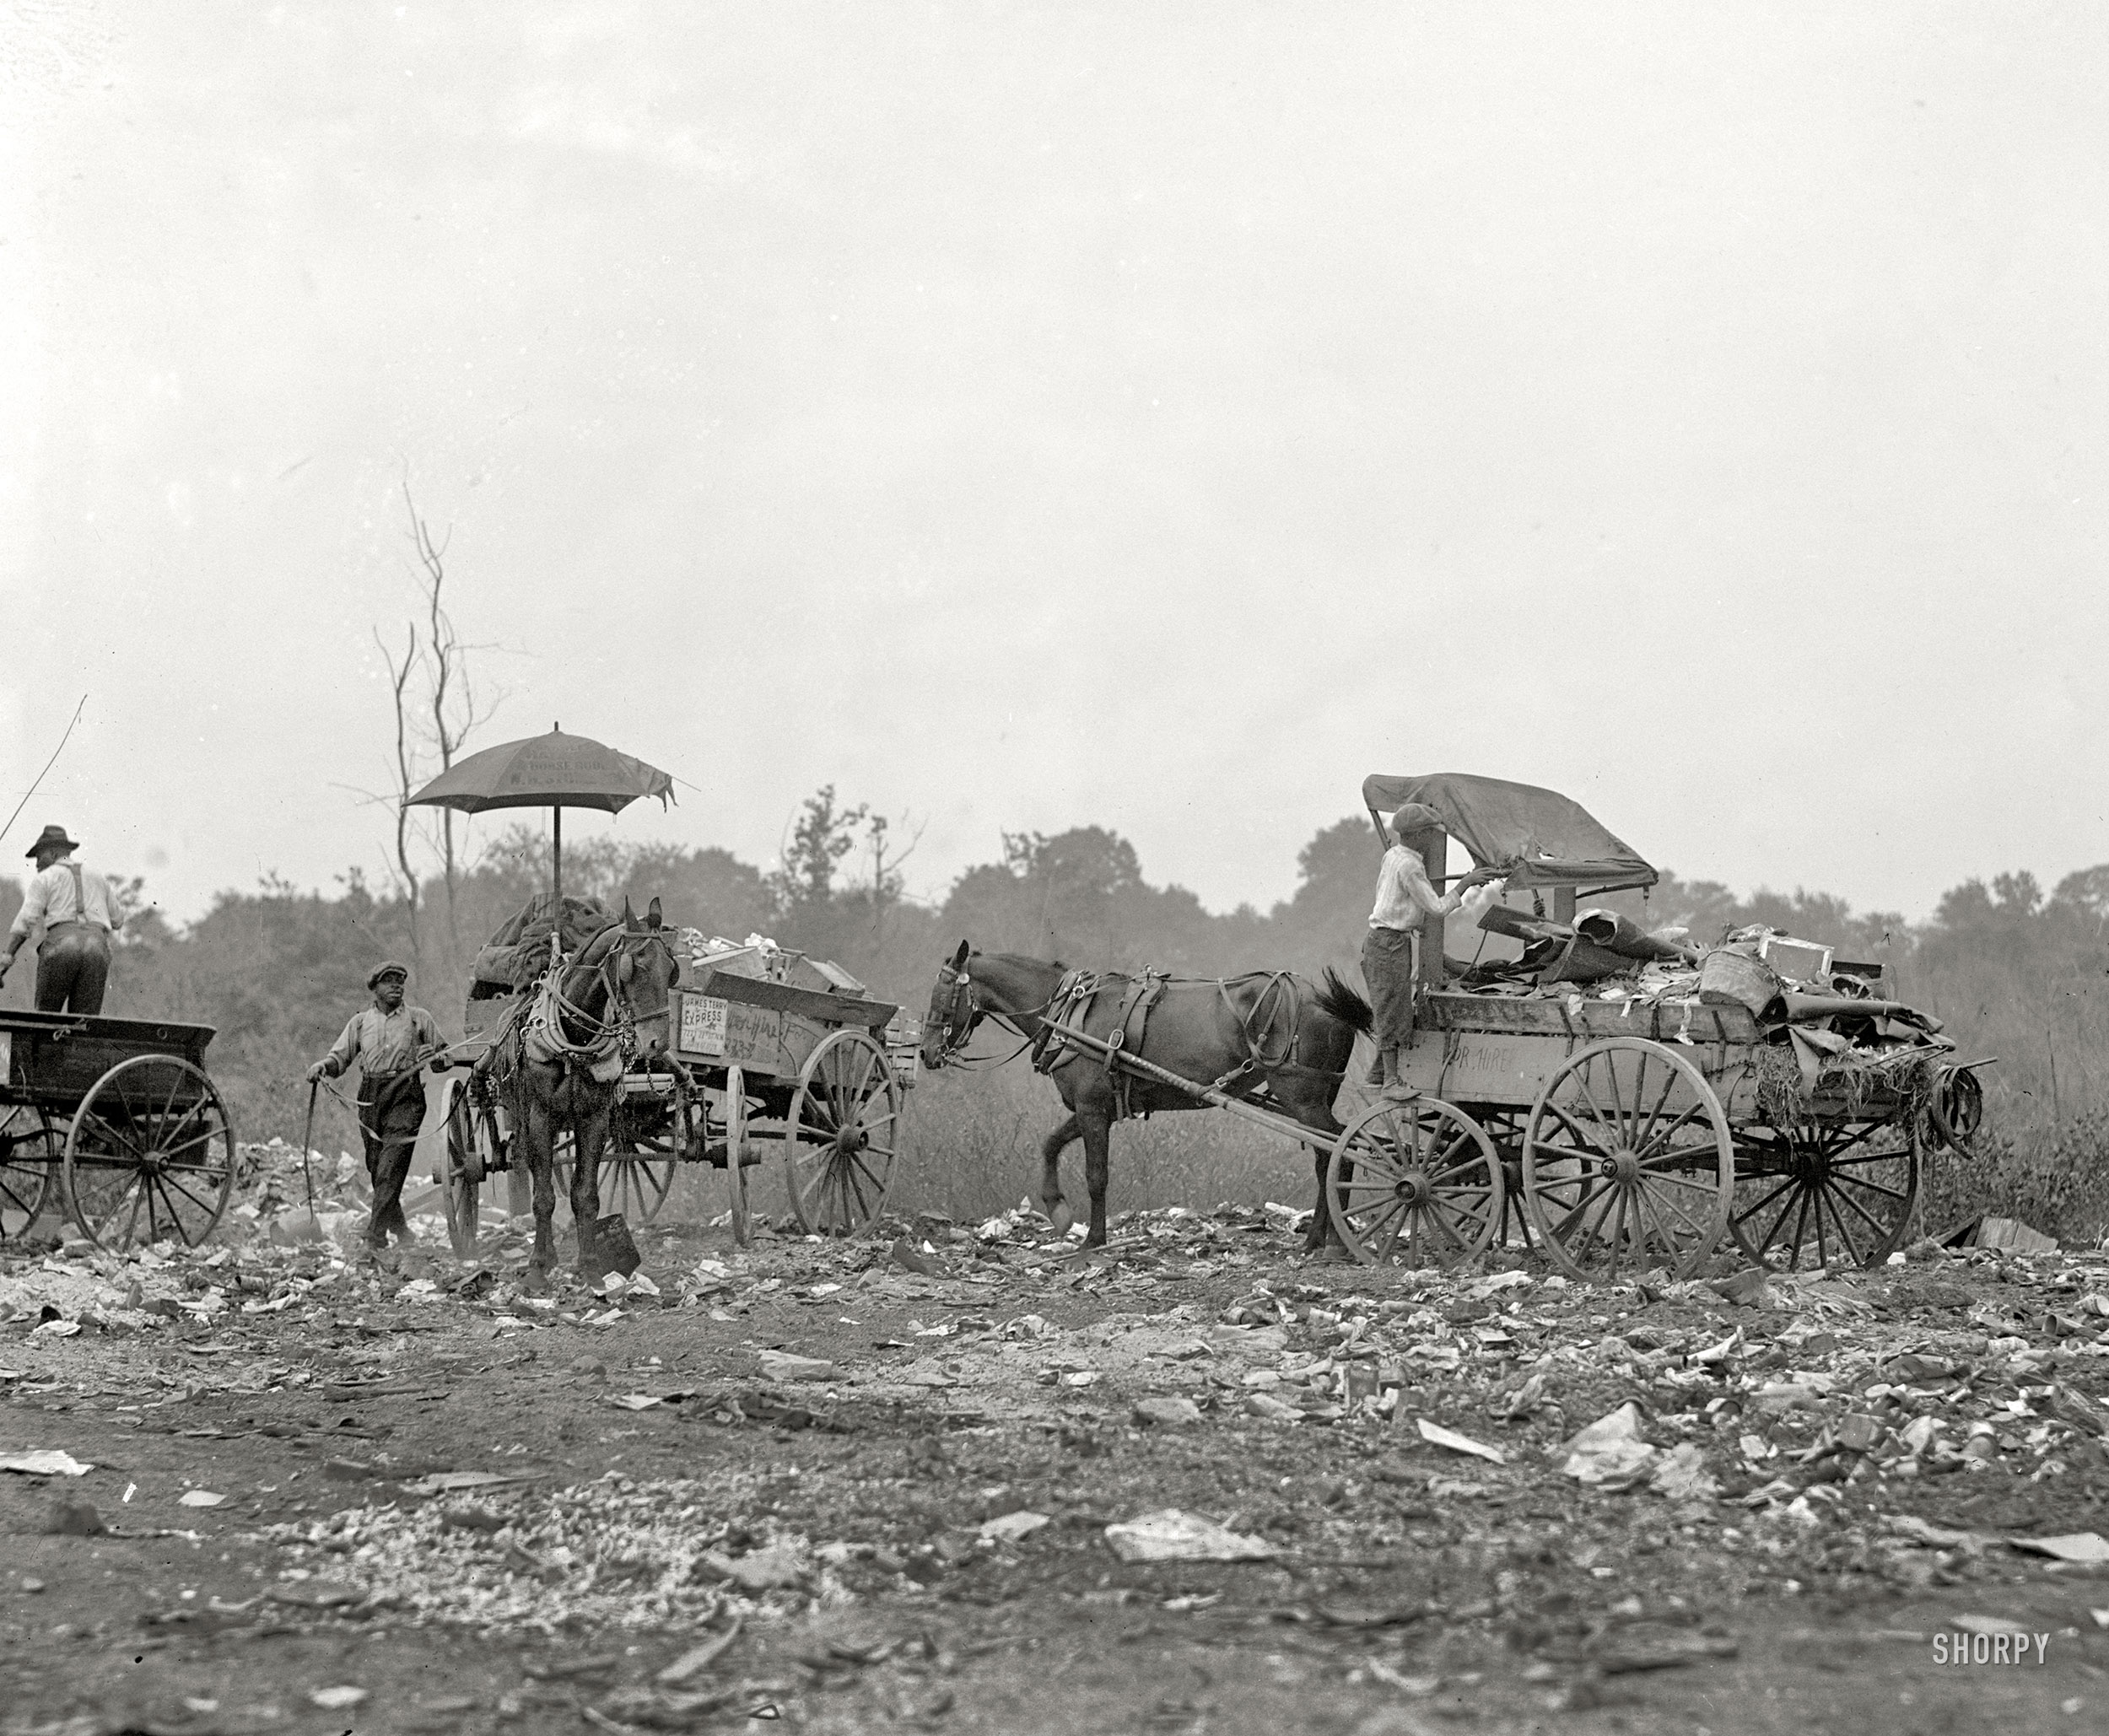 Washington, D.C., 1923. "Dump story." Wagons for hire; James Terry Express on the left. National Photo Company Collection glass negative. View full size.